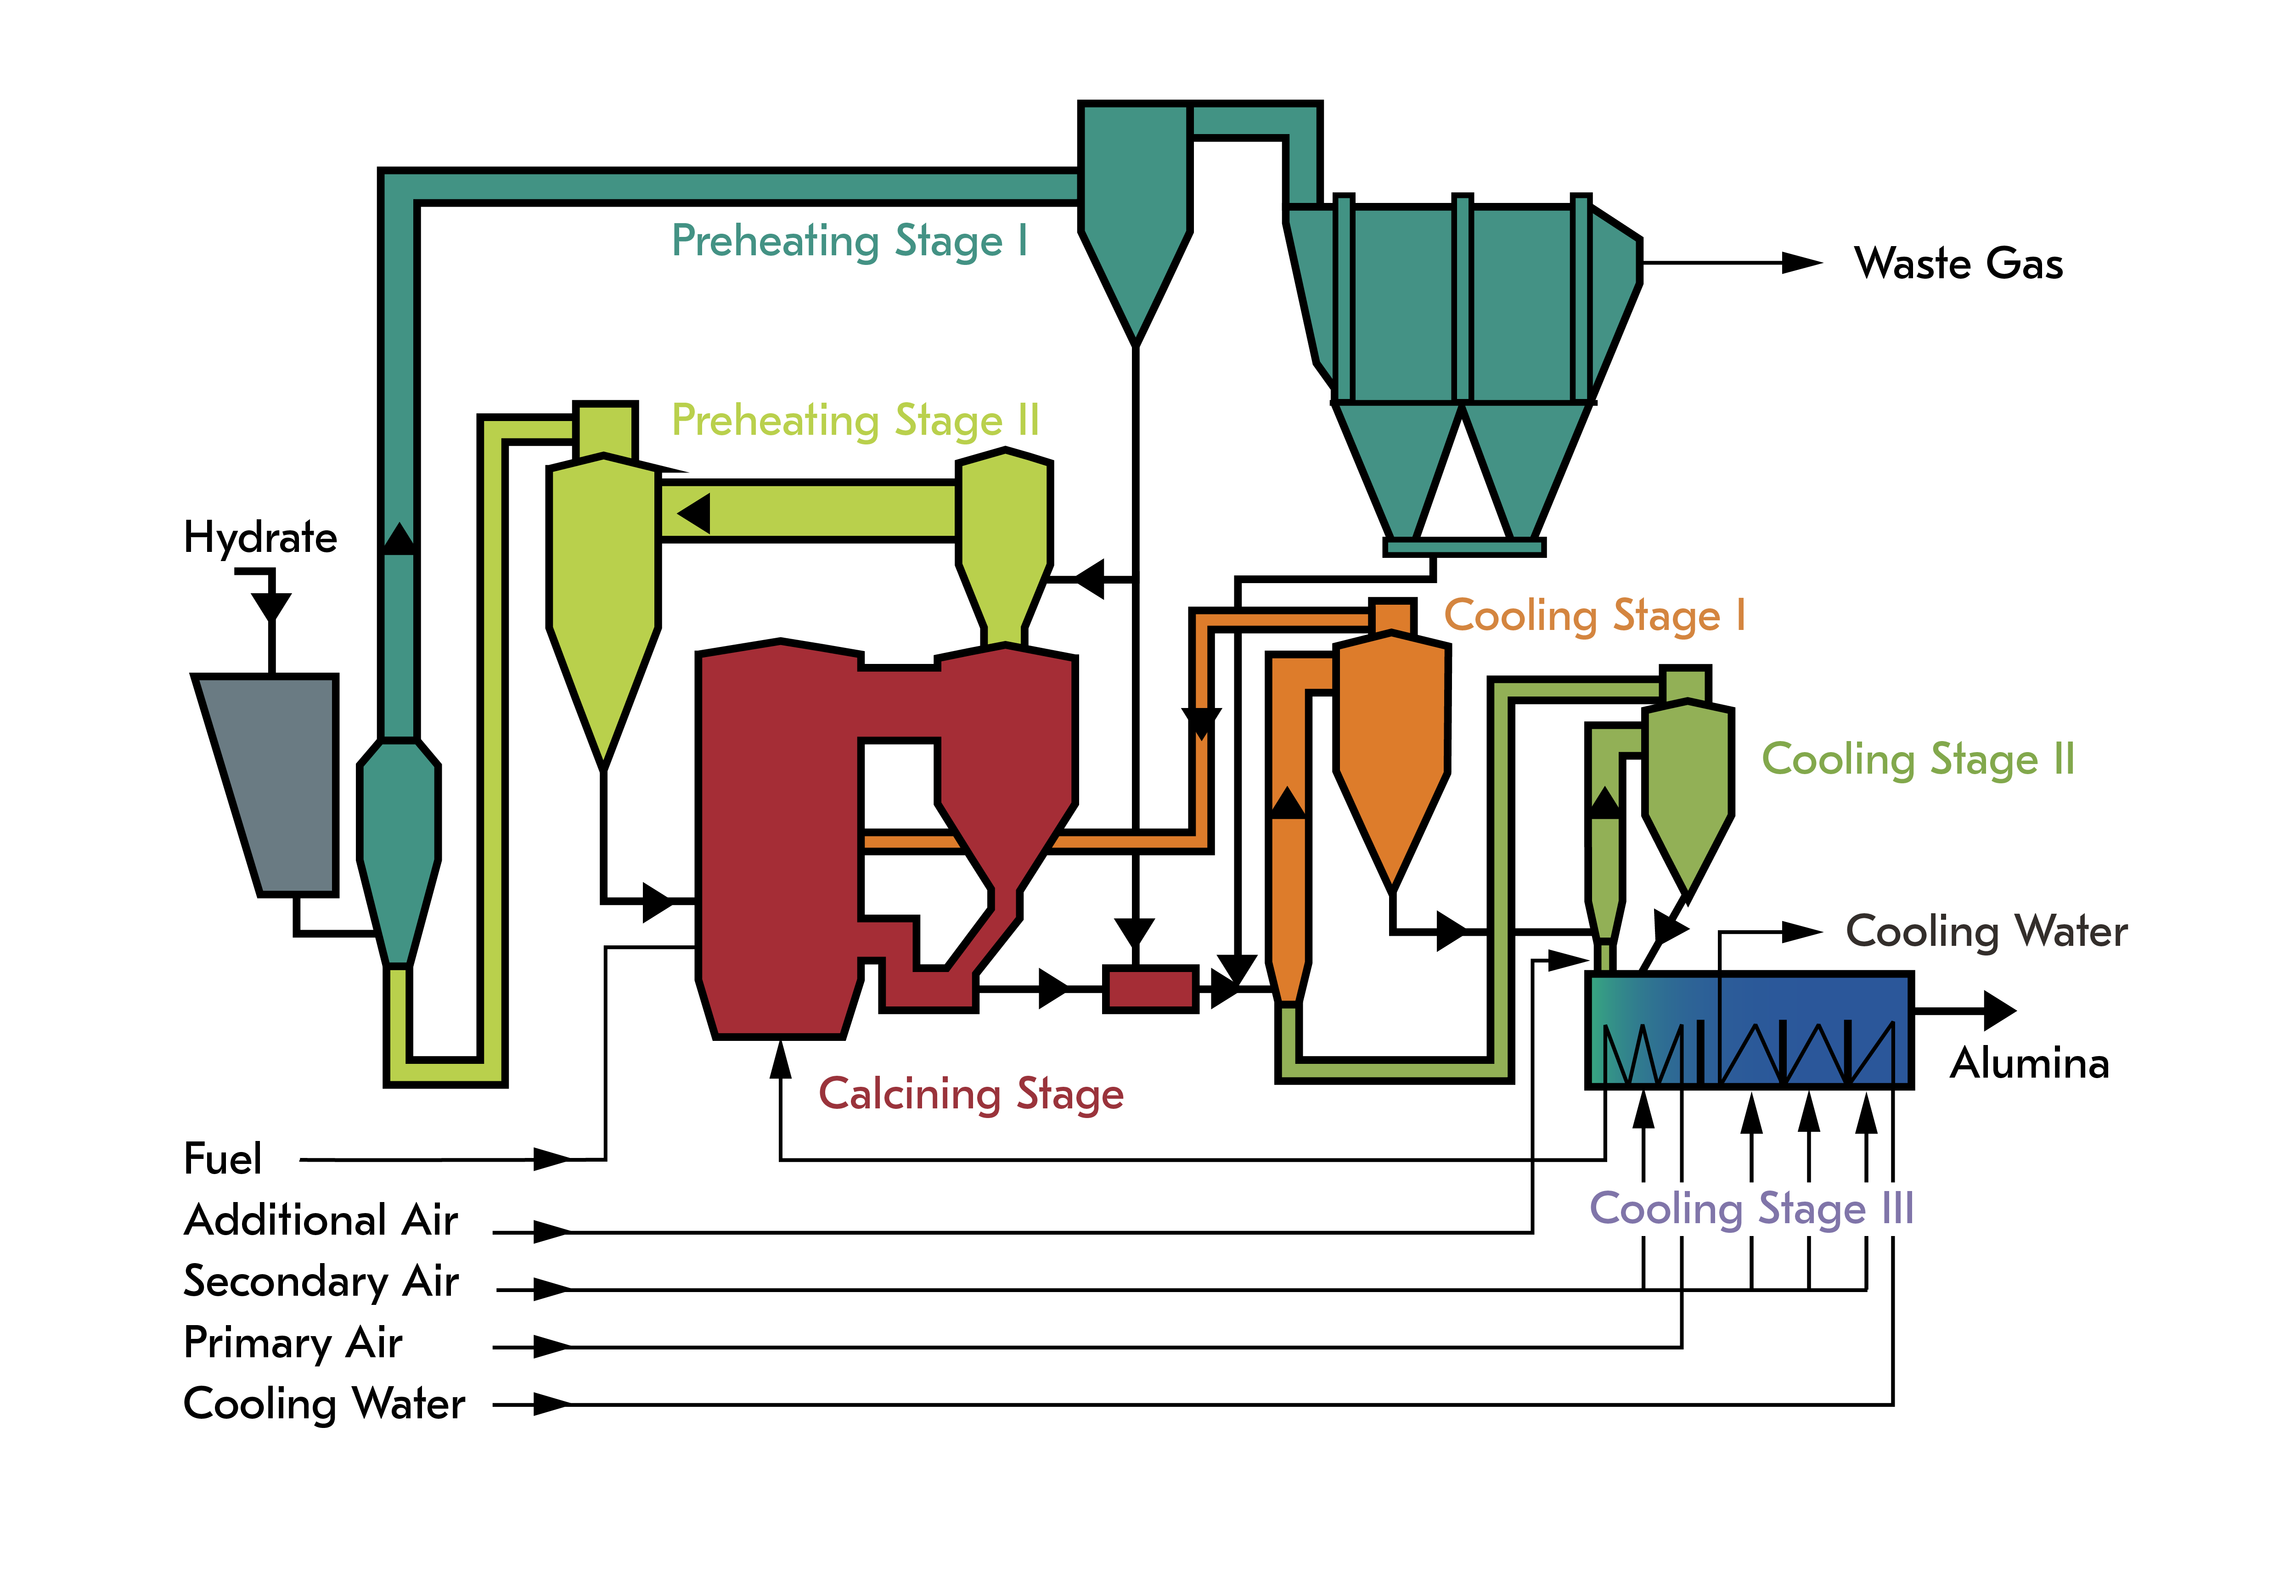 Schematic illustration of Metso’s CFB calciner with optional flash calcination stage and optional feed dryer